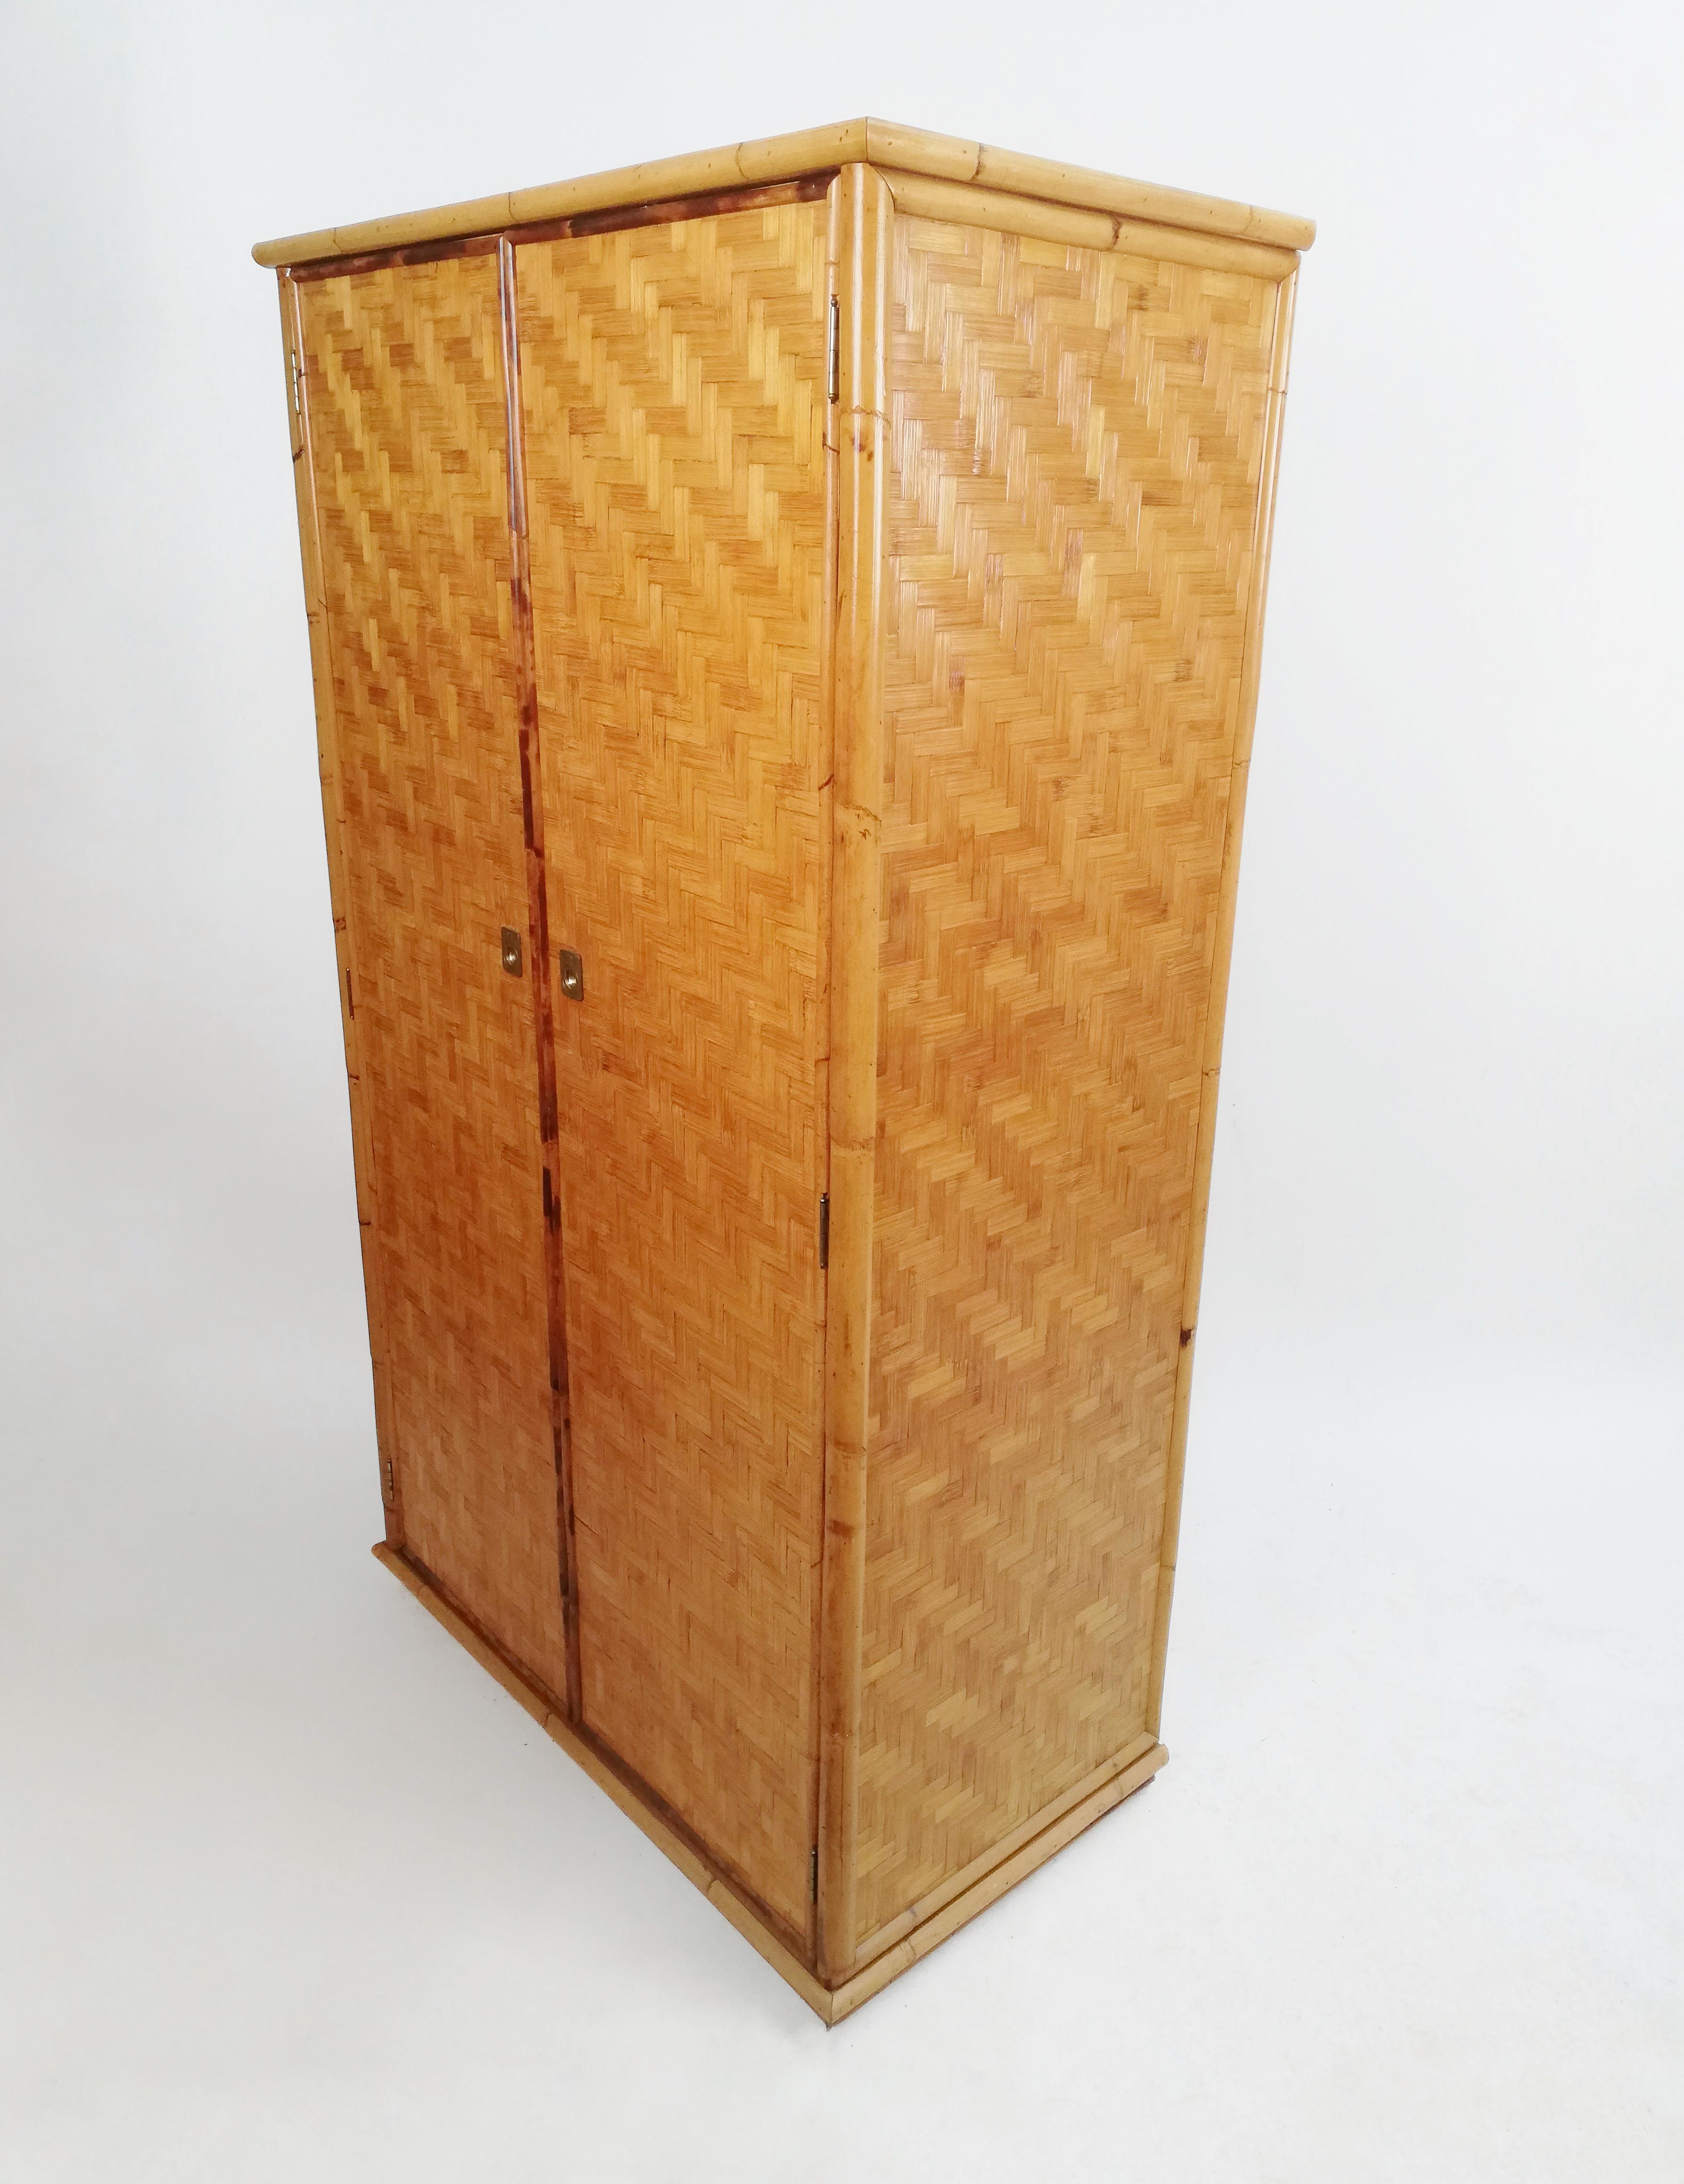 Vintage 2 Door Wardrobe in Wicker Cane, Rattan and Bamboo by Dal Vera, 1970s For Sale 6